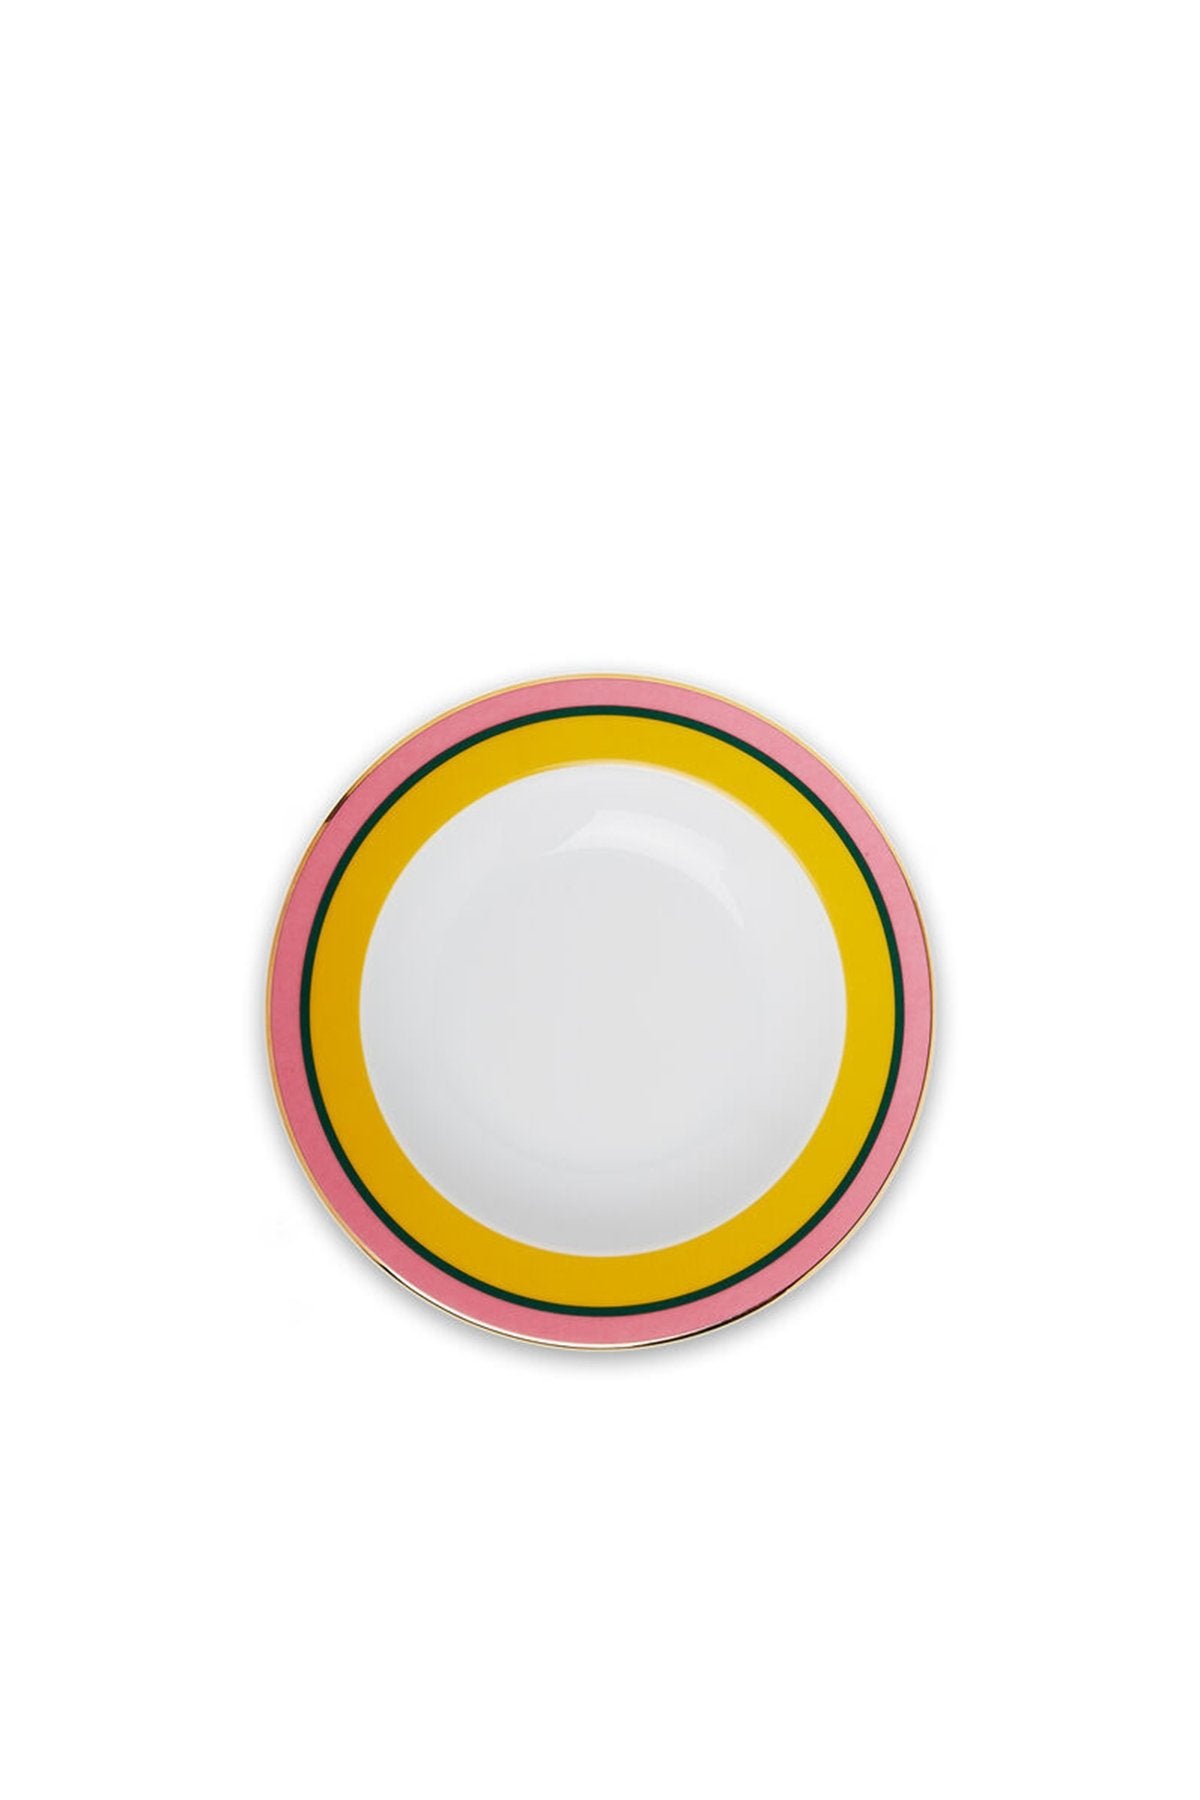 Soup Plate in Rainbow Giallo - shop-olivia.com